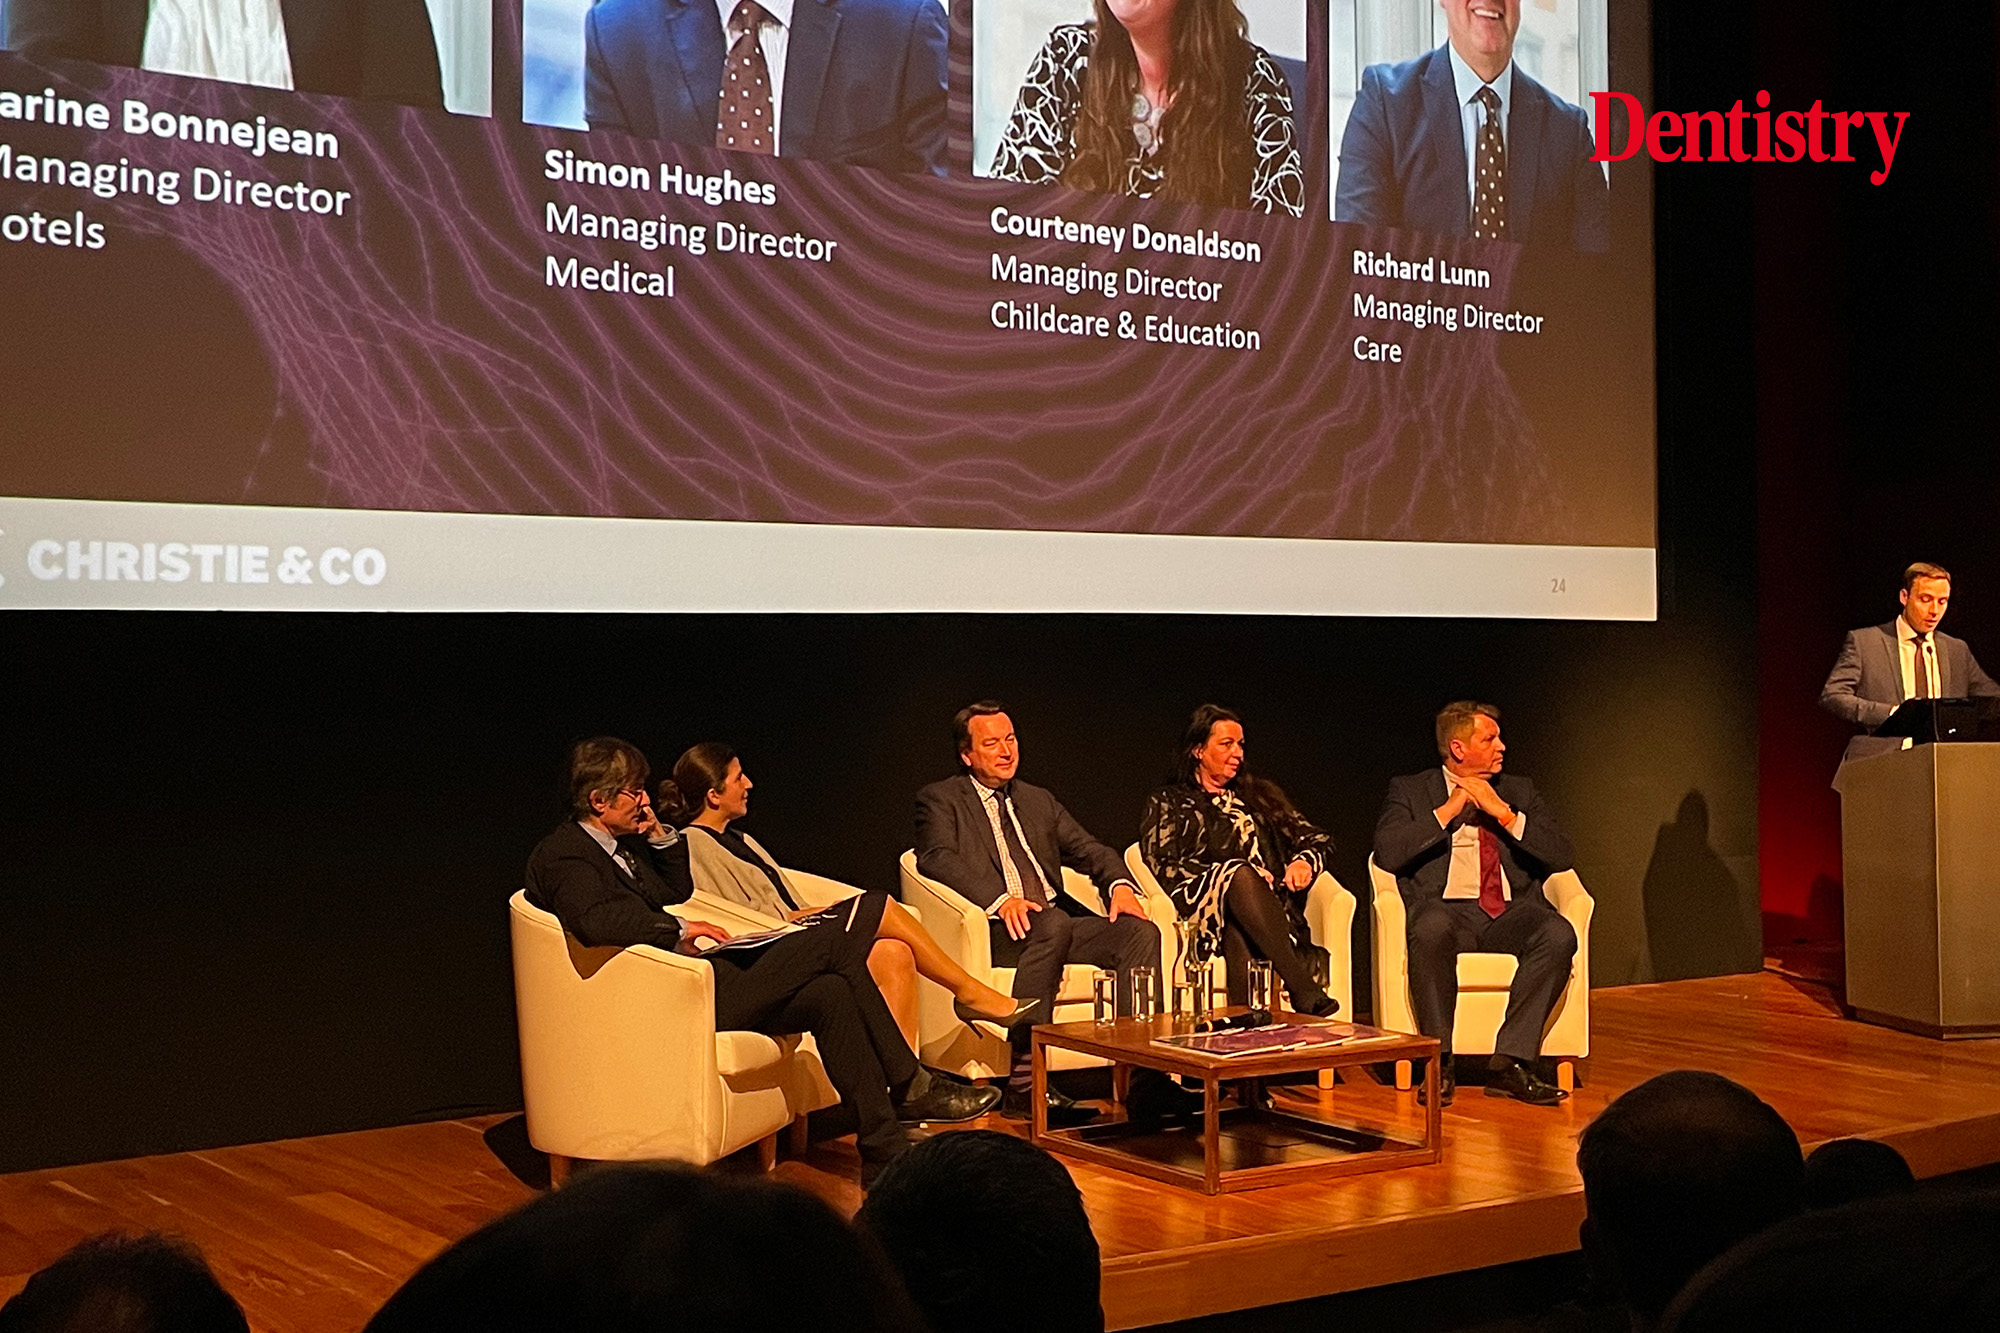 Tamara Milanovic attended Christie & Co’s Business Outlook event at the British Museum to hear about the market predictions for dentistry.